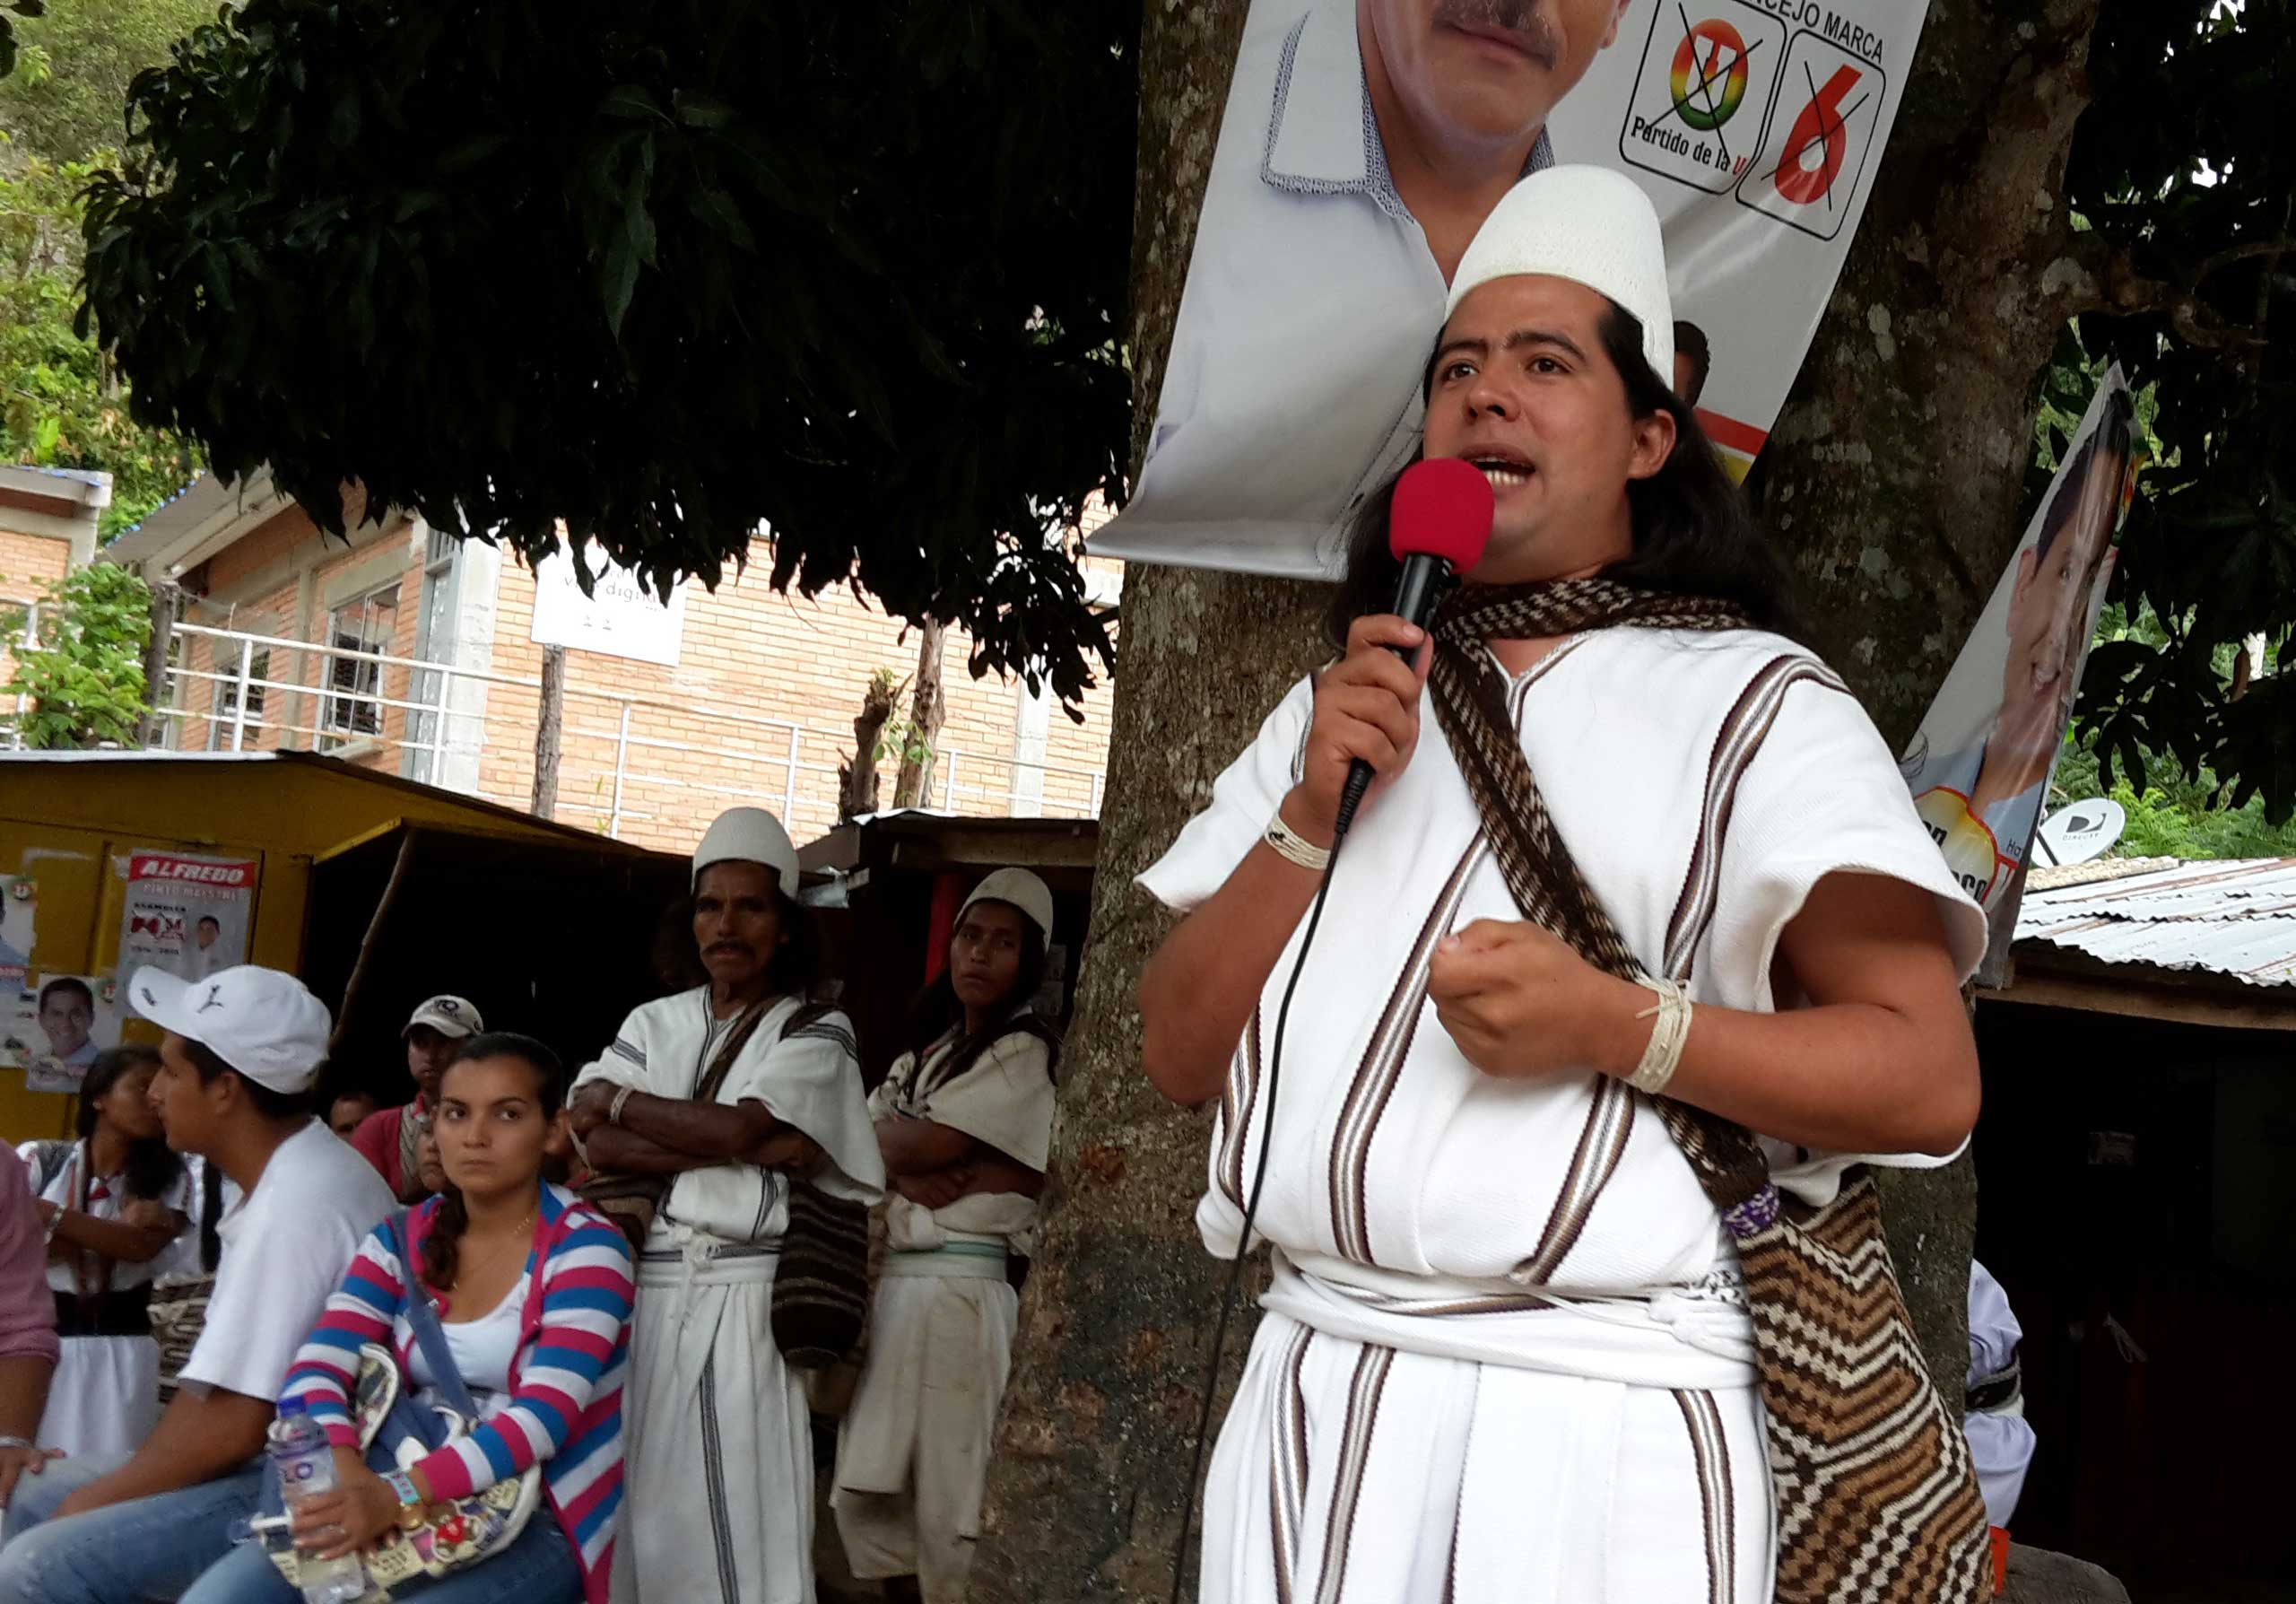 Saul Mindiola, an Arhuaco Indian who is running for mayor of the Colombian town of Pueblo Bello, gives a campaign speech in Pueblo Bello, on Sept. 20, 2015. Mindiola fears he could lose Sunday's election due to vote fraud, a major problem in hundreds of Colombian towns and cities. (John Otis)